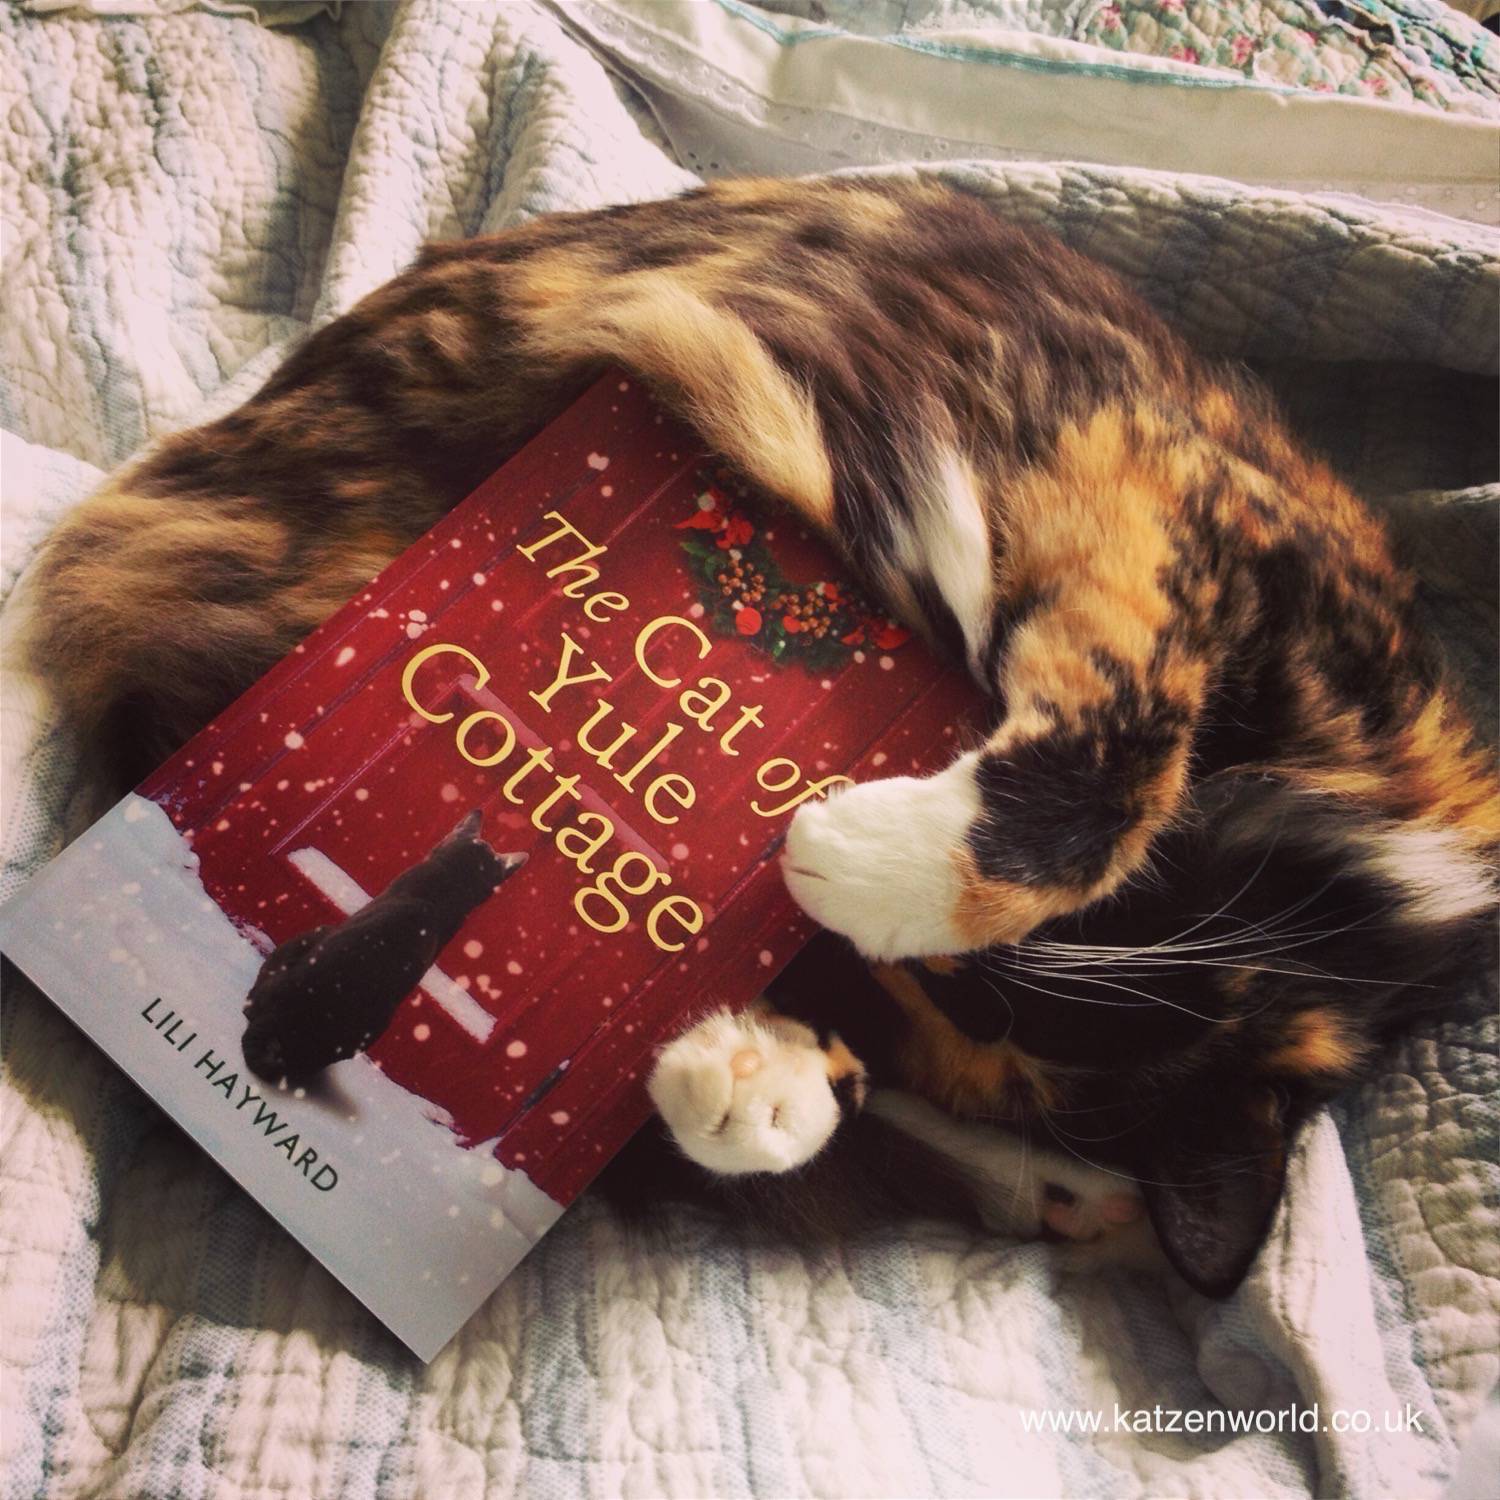 The Cat of Yule Cottage by Lili Hayward